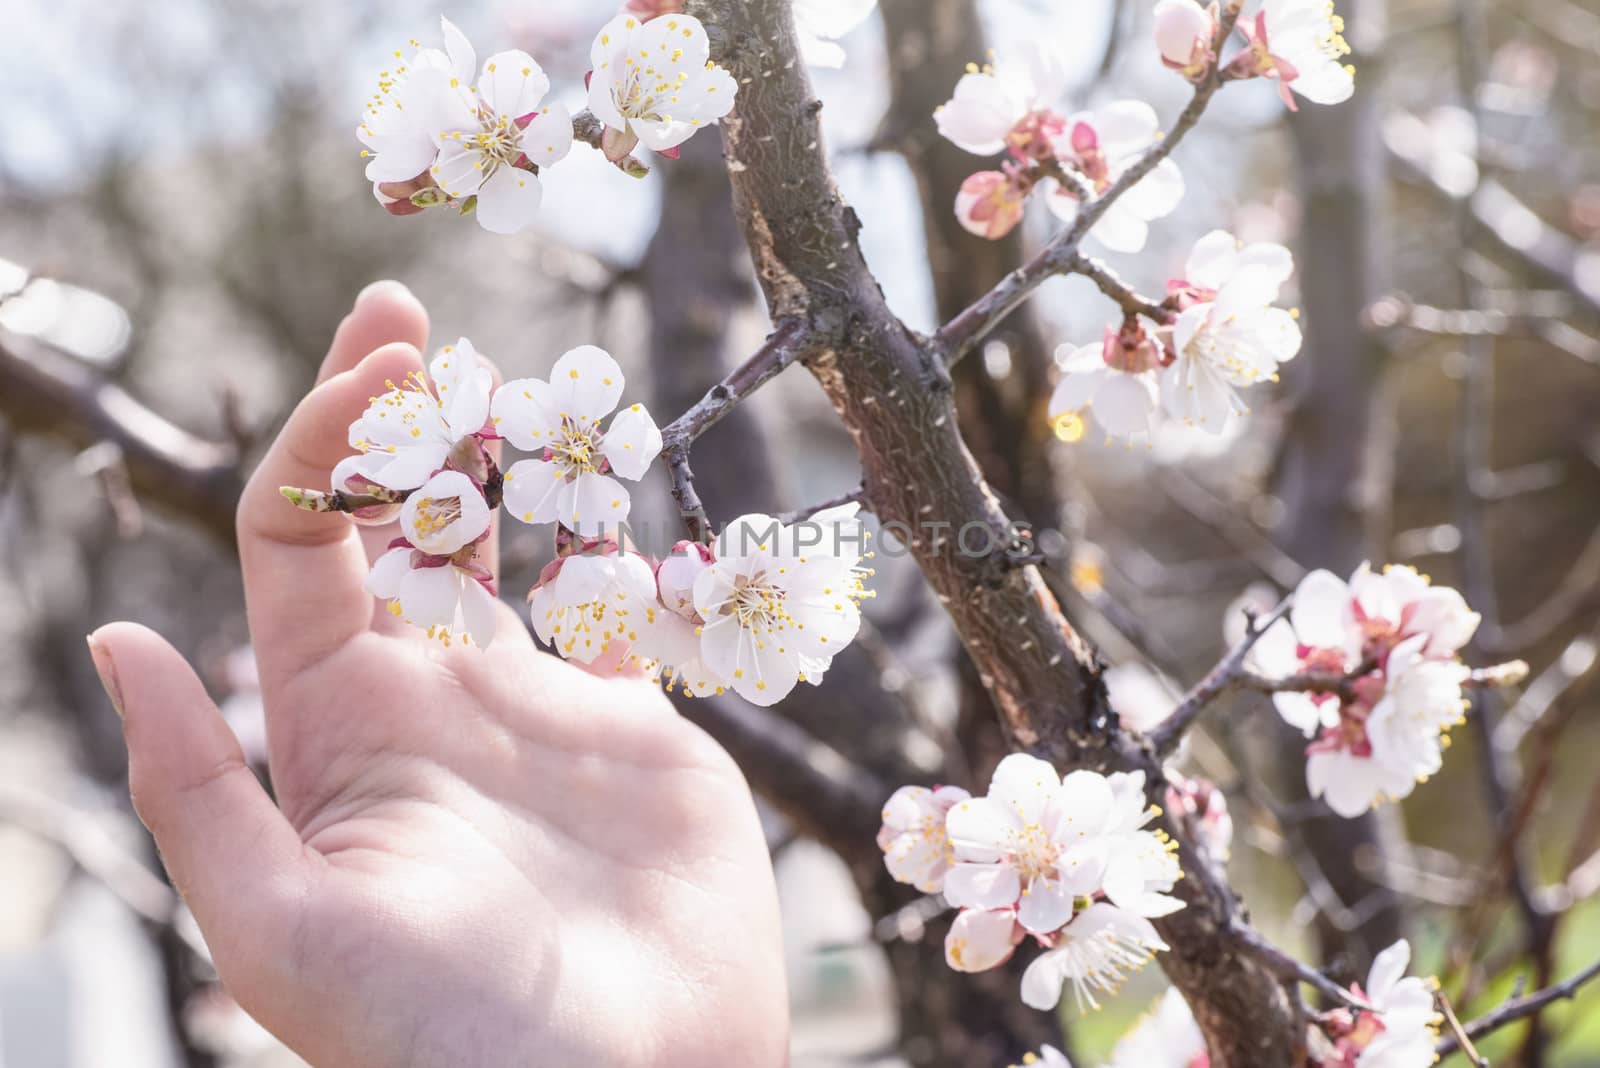 Spring day. A branch of cherry blossoms in hand. Flowering apricot on a sunny day, hand holding cherry blossoms in spring.